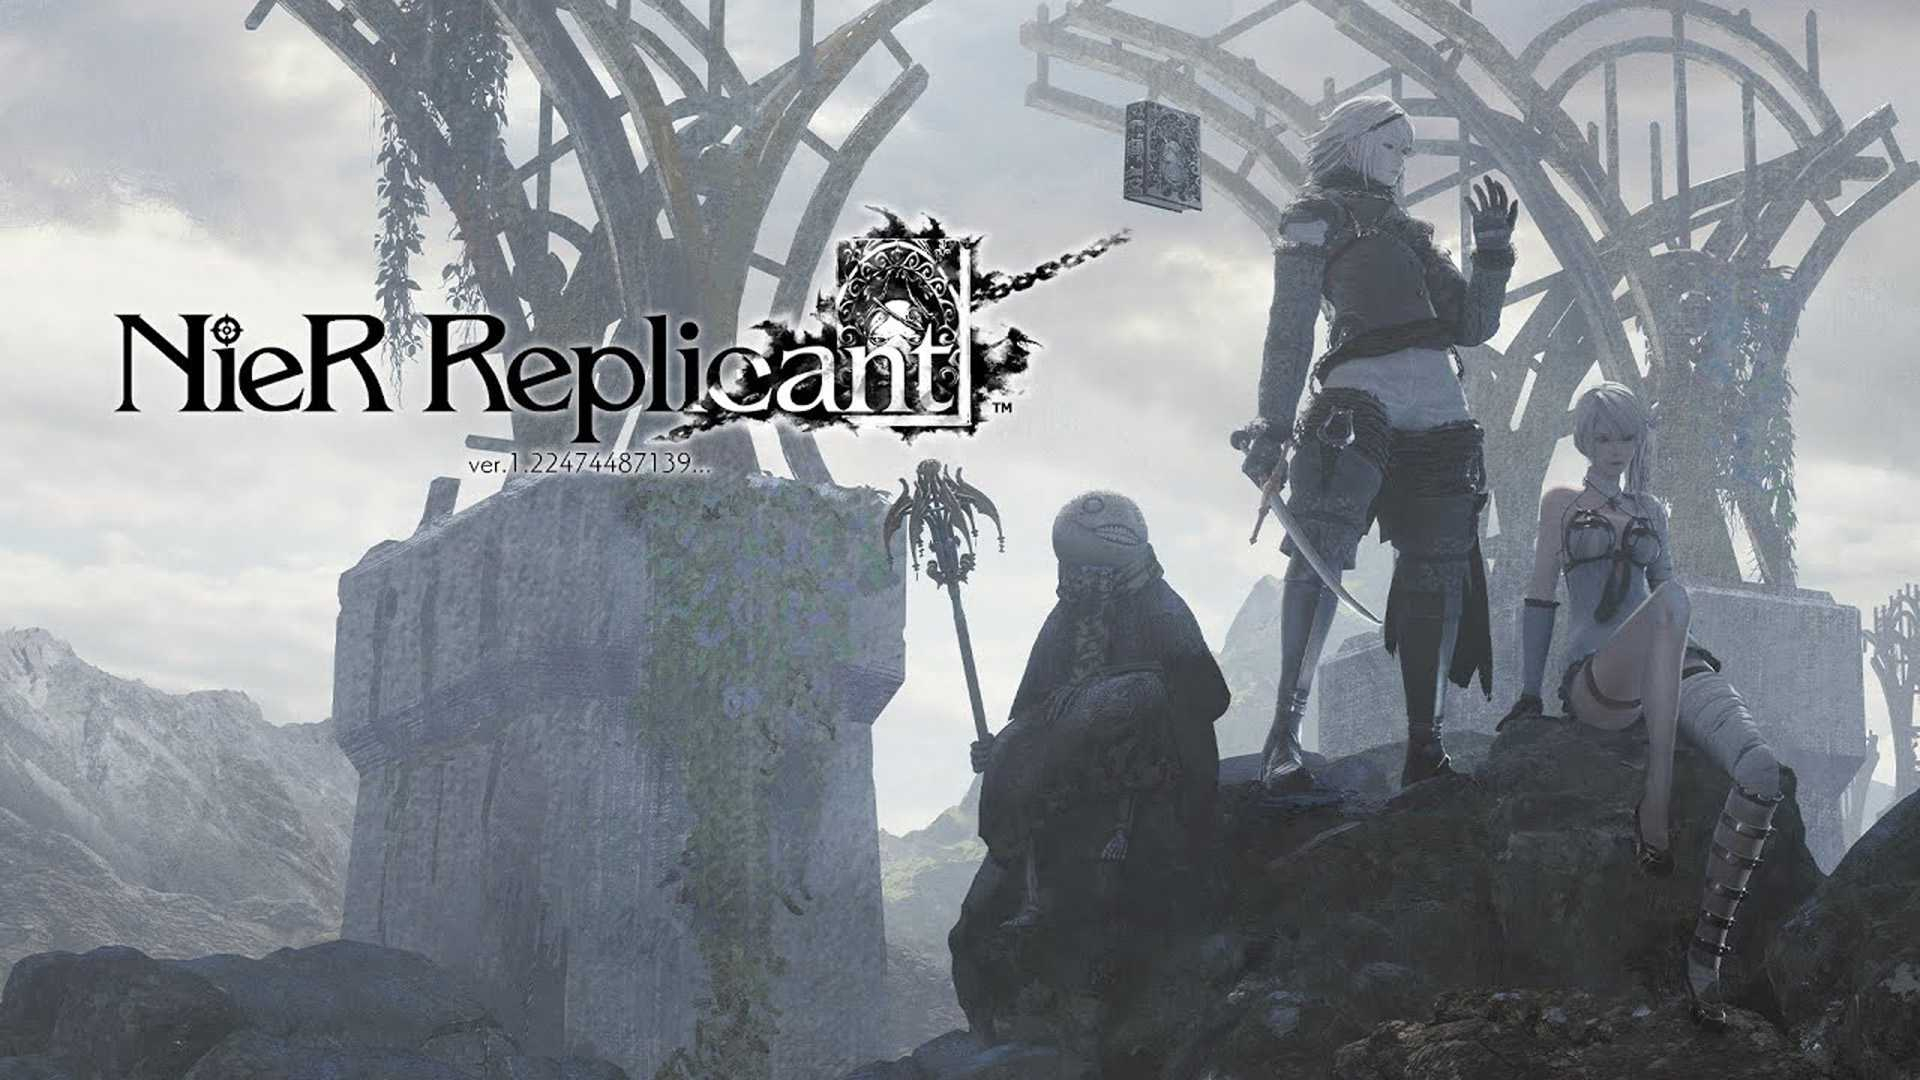 1920x1080 Wallpaper Nier Replicant Awesome Free HD Wallpapers